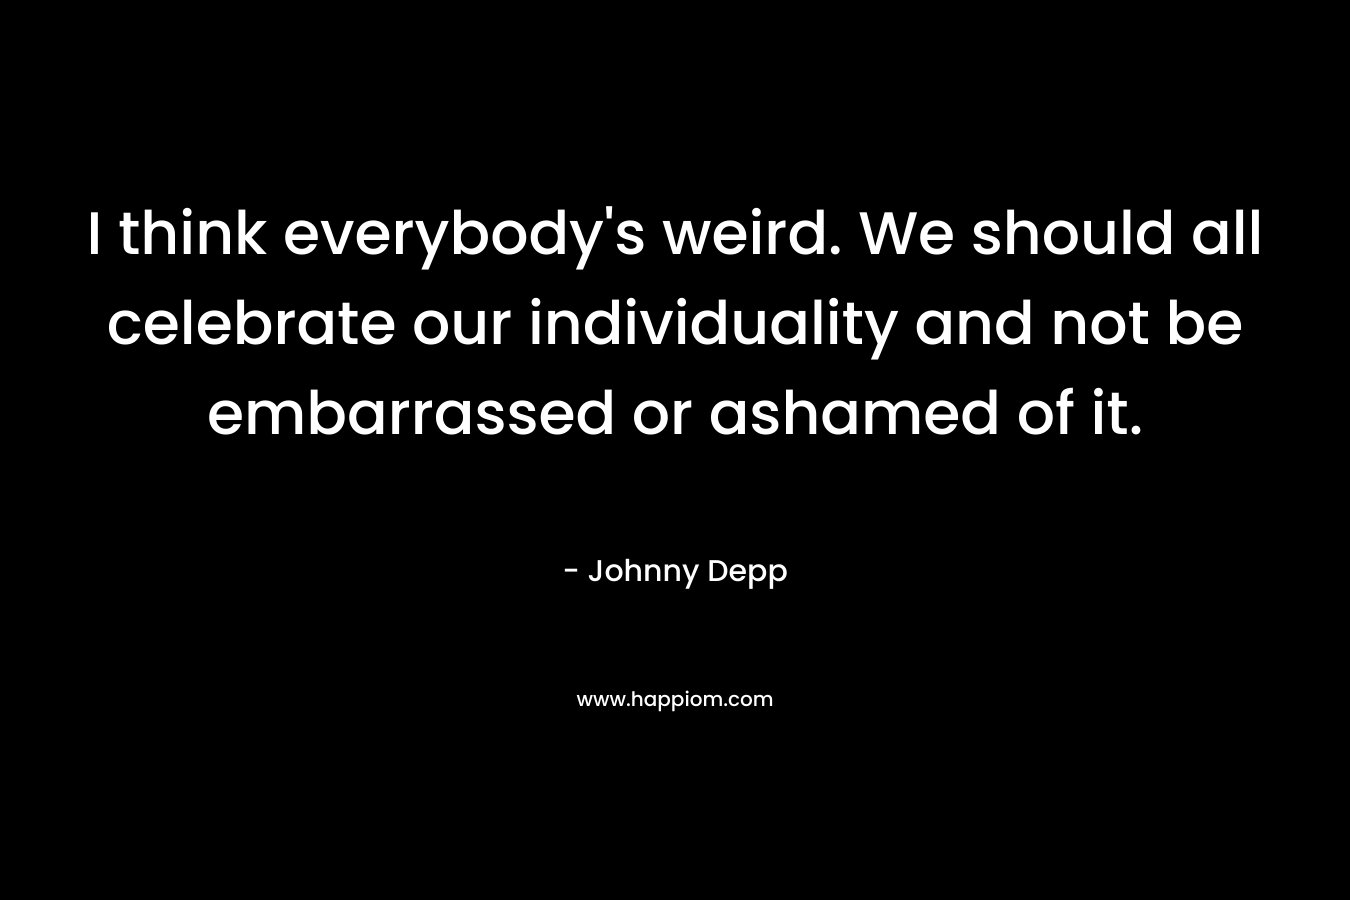 I think everybody’s weird. We should all celebrate our individuality and not be embarrassed or ashamed of it. – Johnny Depp